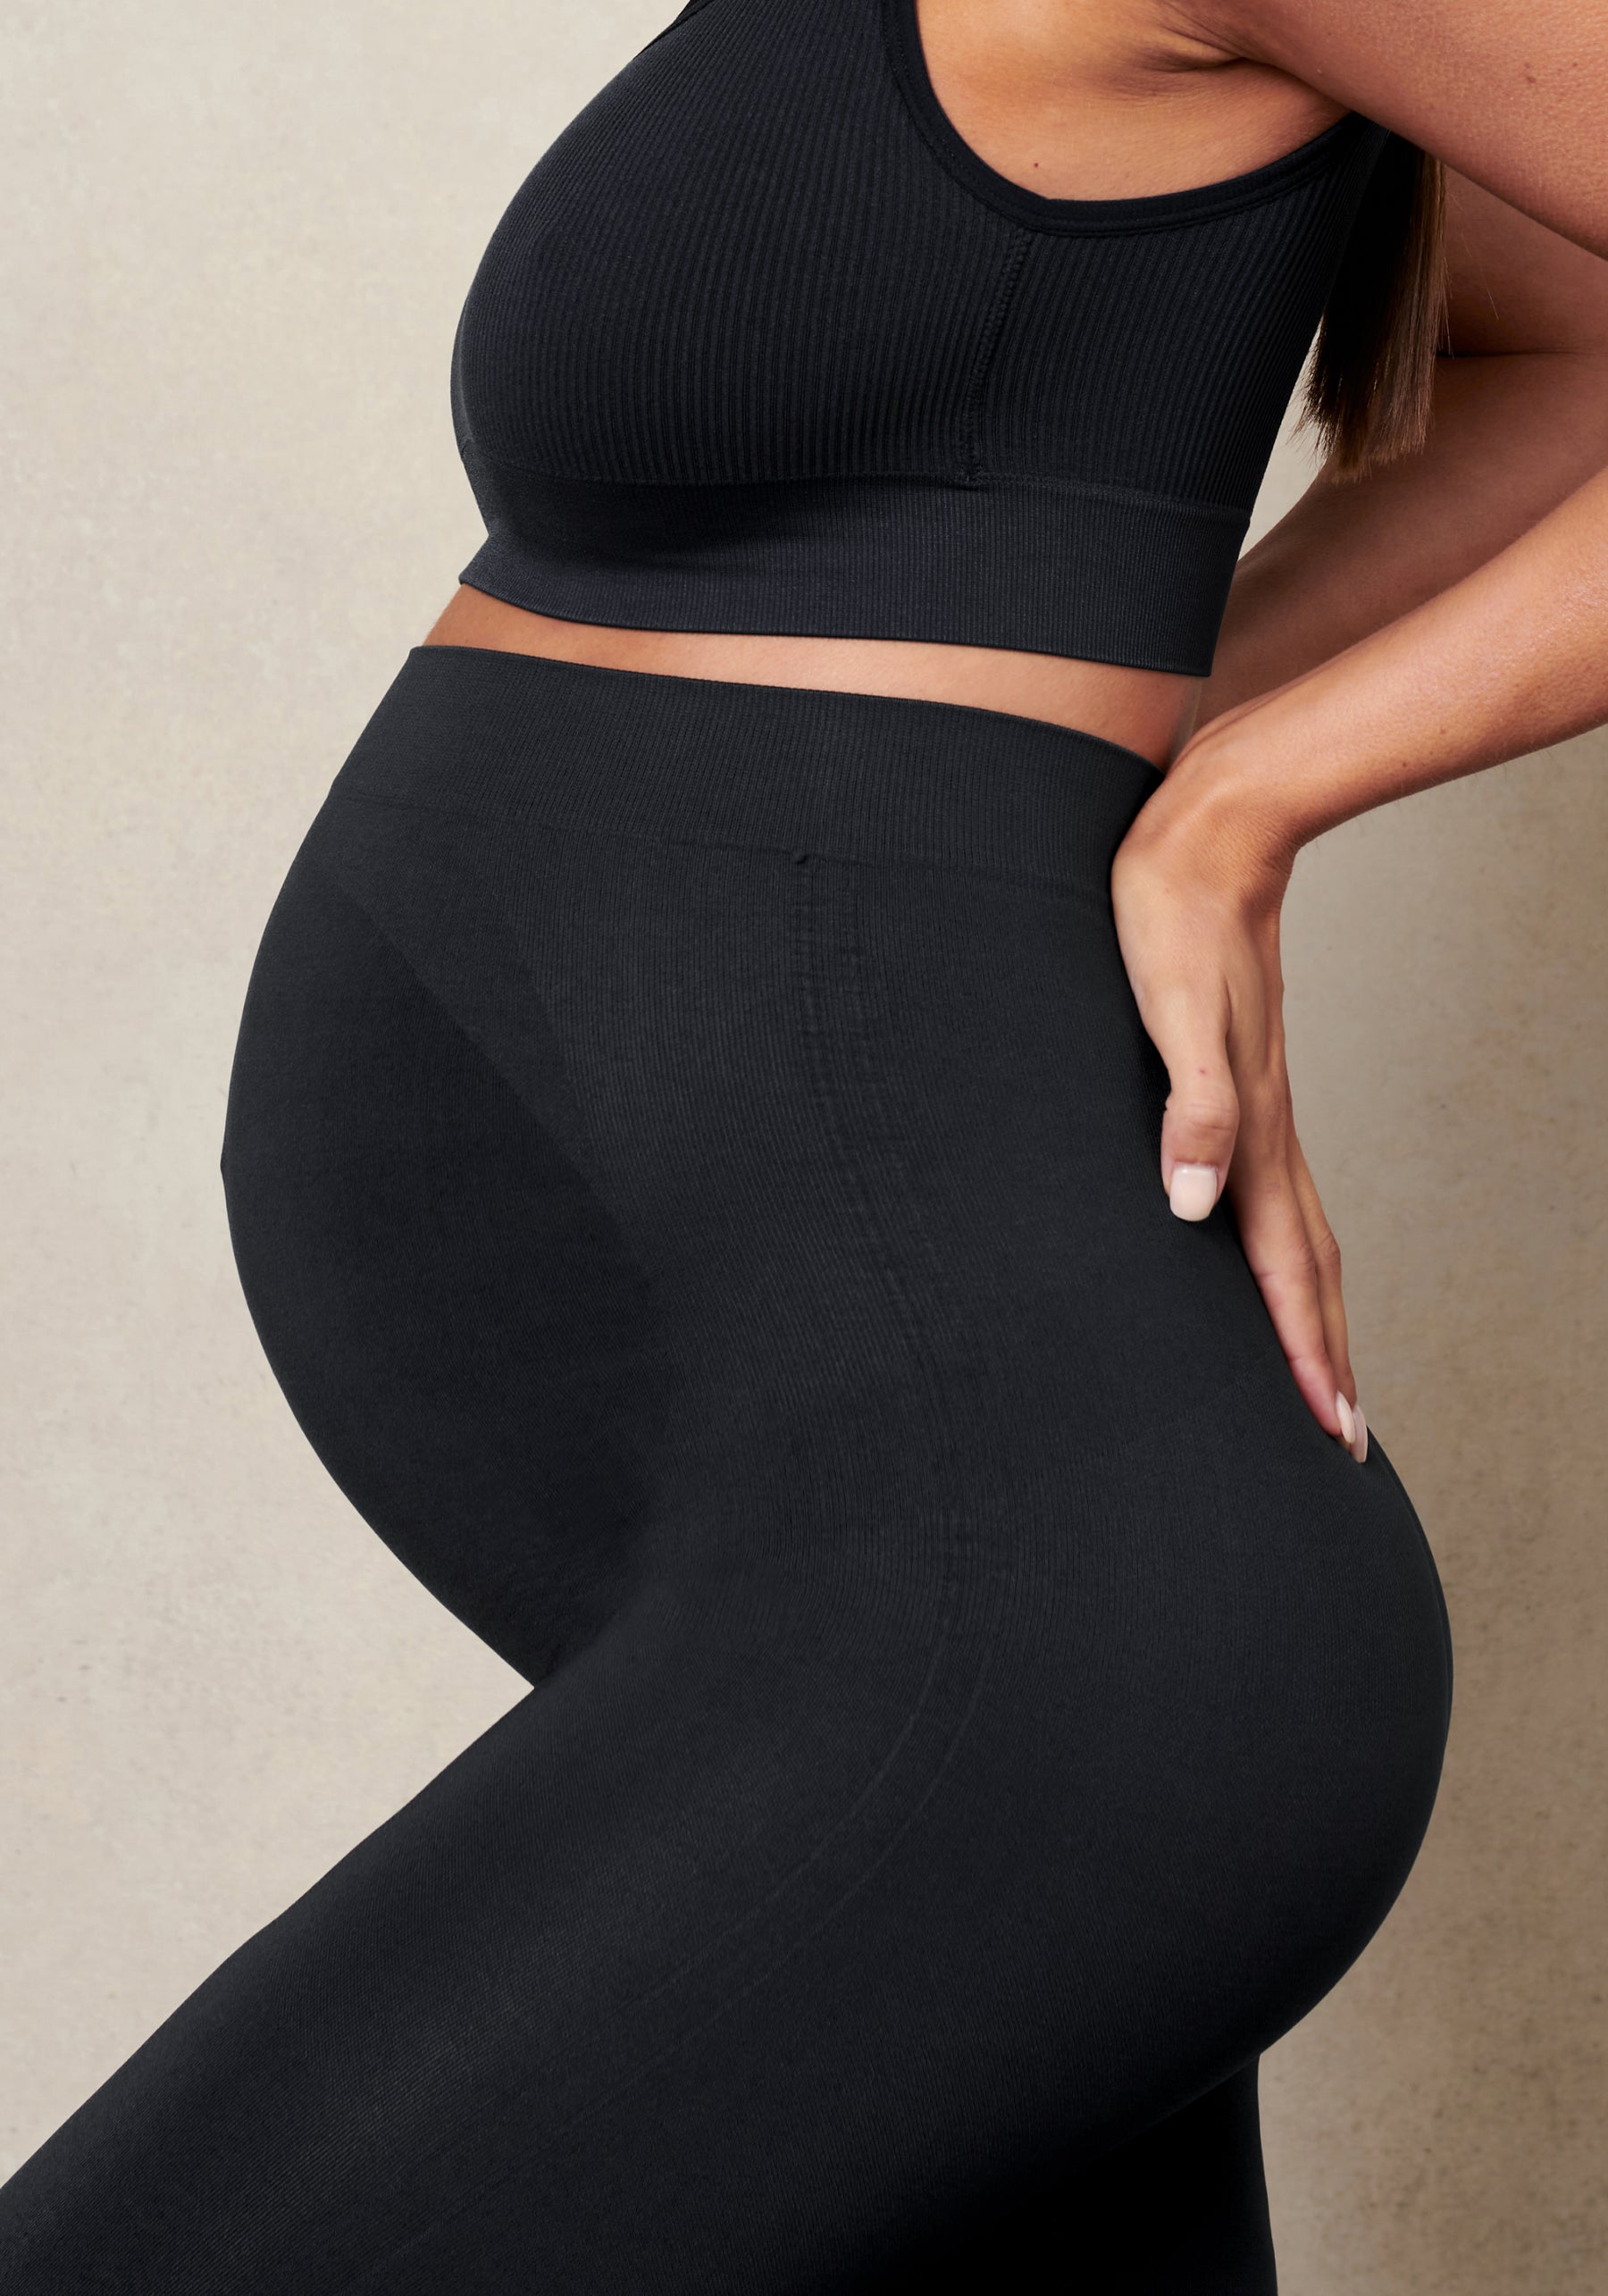 Pregnancy Support Solutions With Blanqi » Read Now!